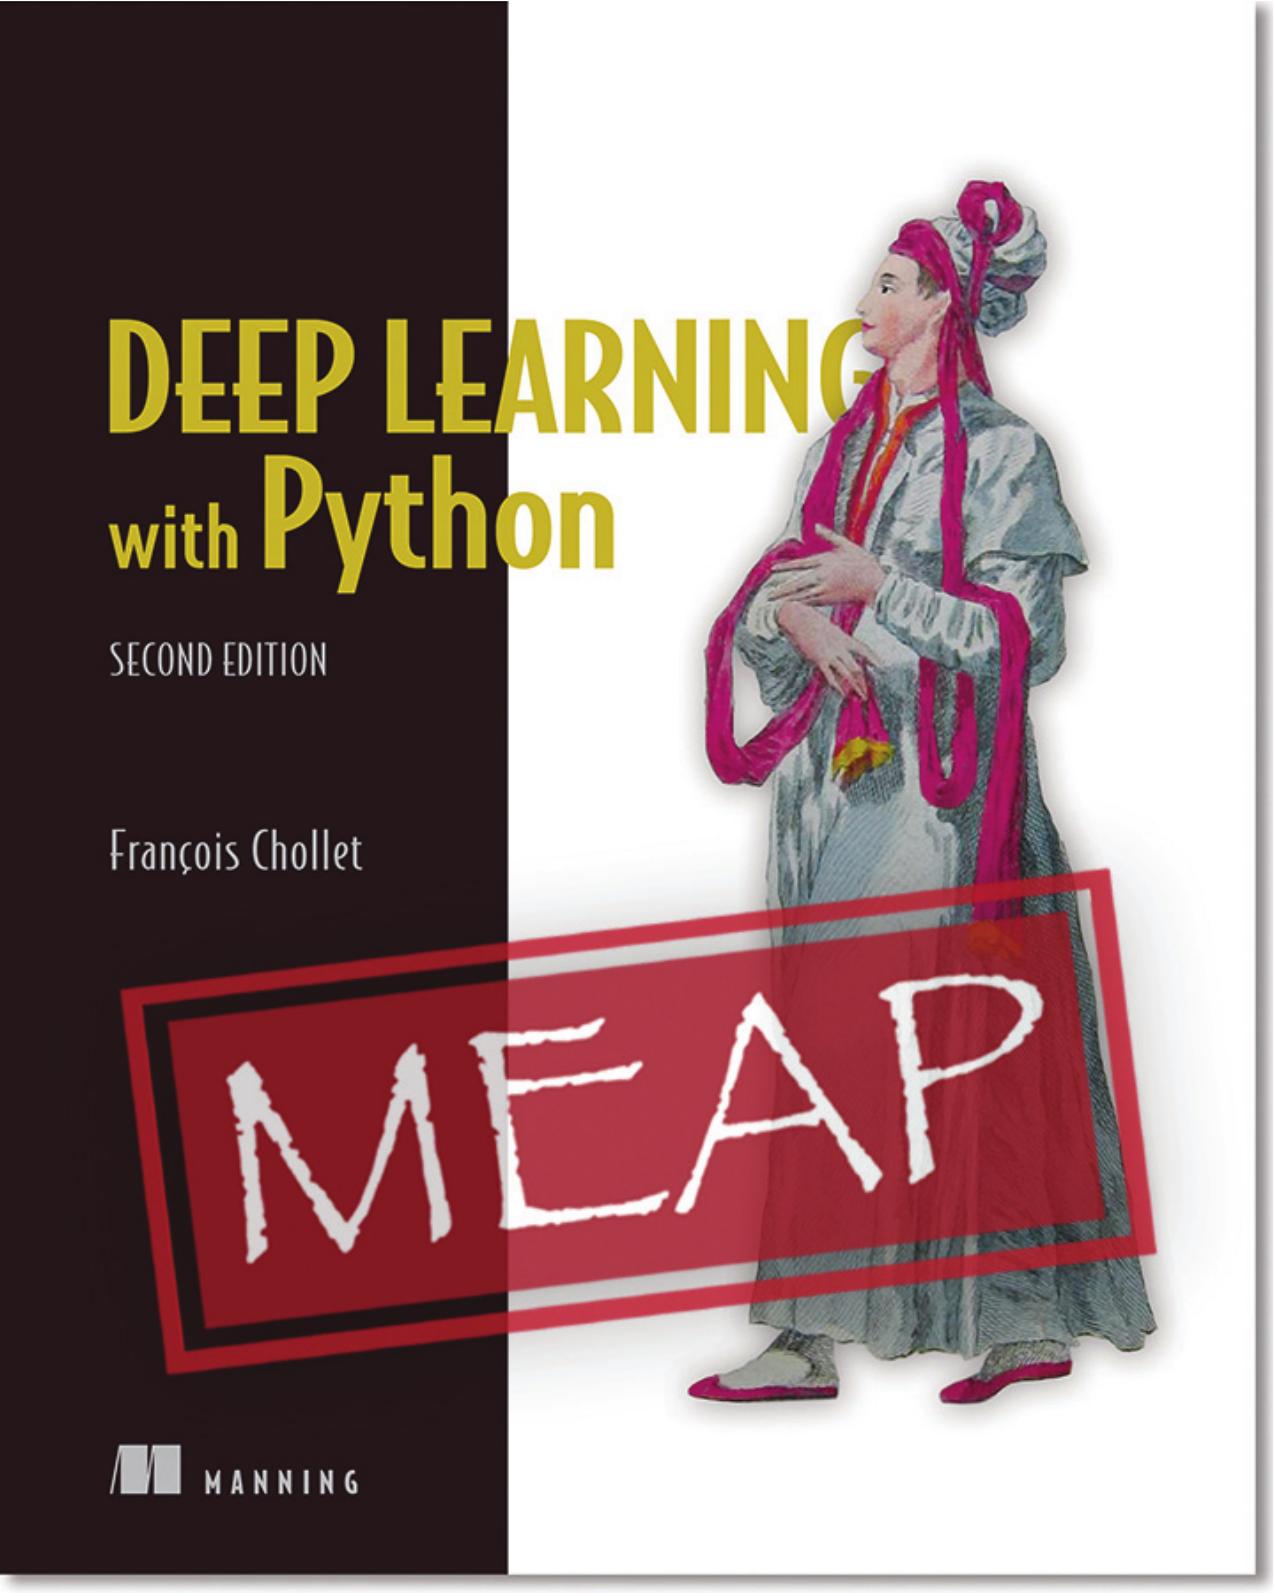 Deep Learning with Python, Second Edition MEAP